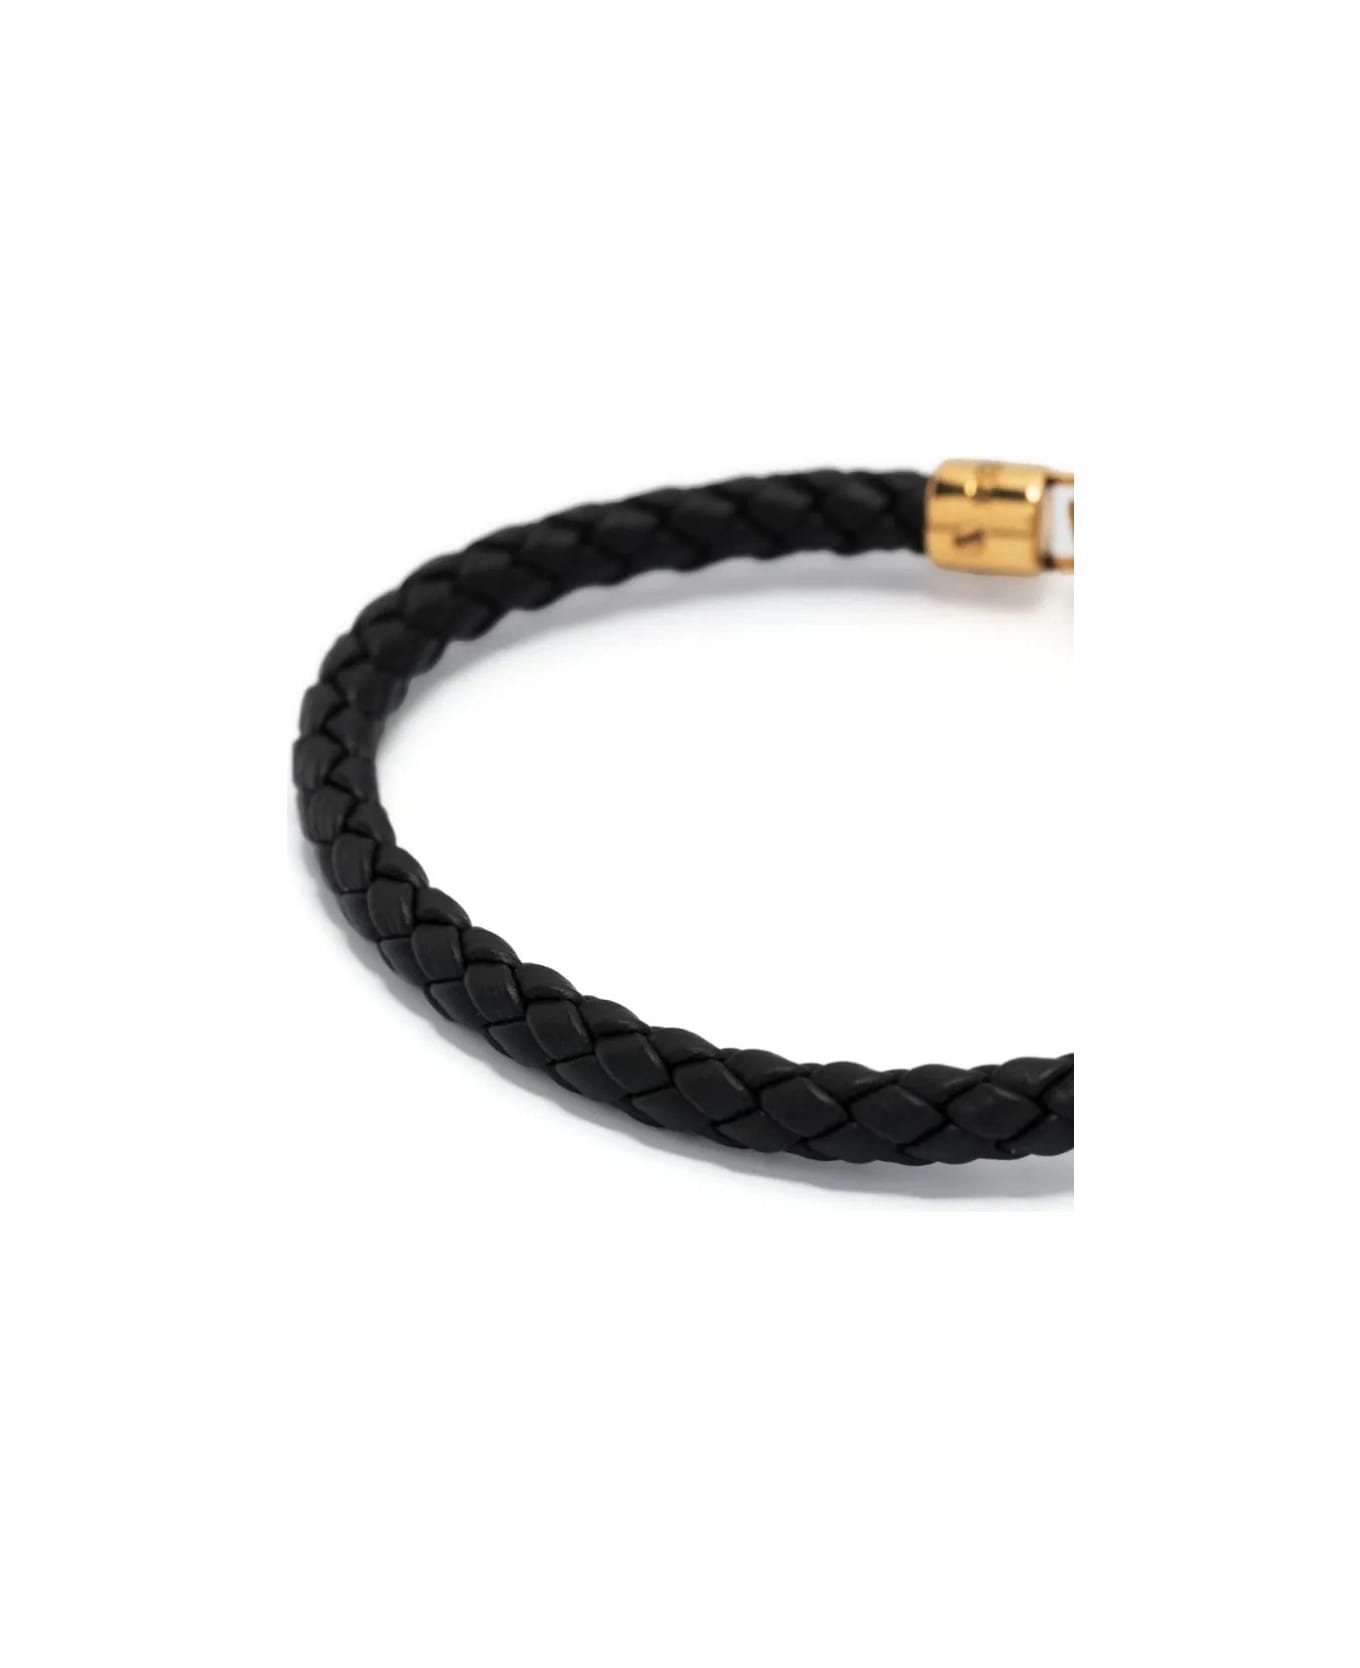 Alexander McQueen Braided Leather Bracelet With Skull Detail - Black ブレスレット